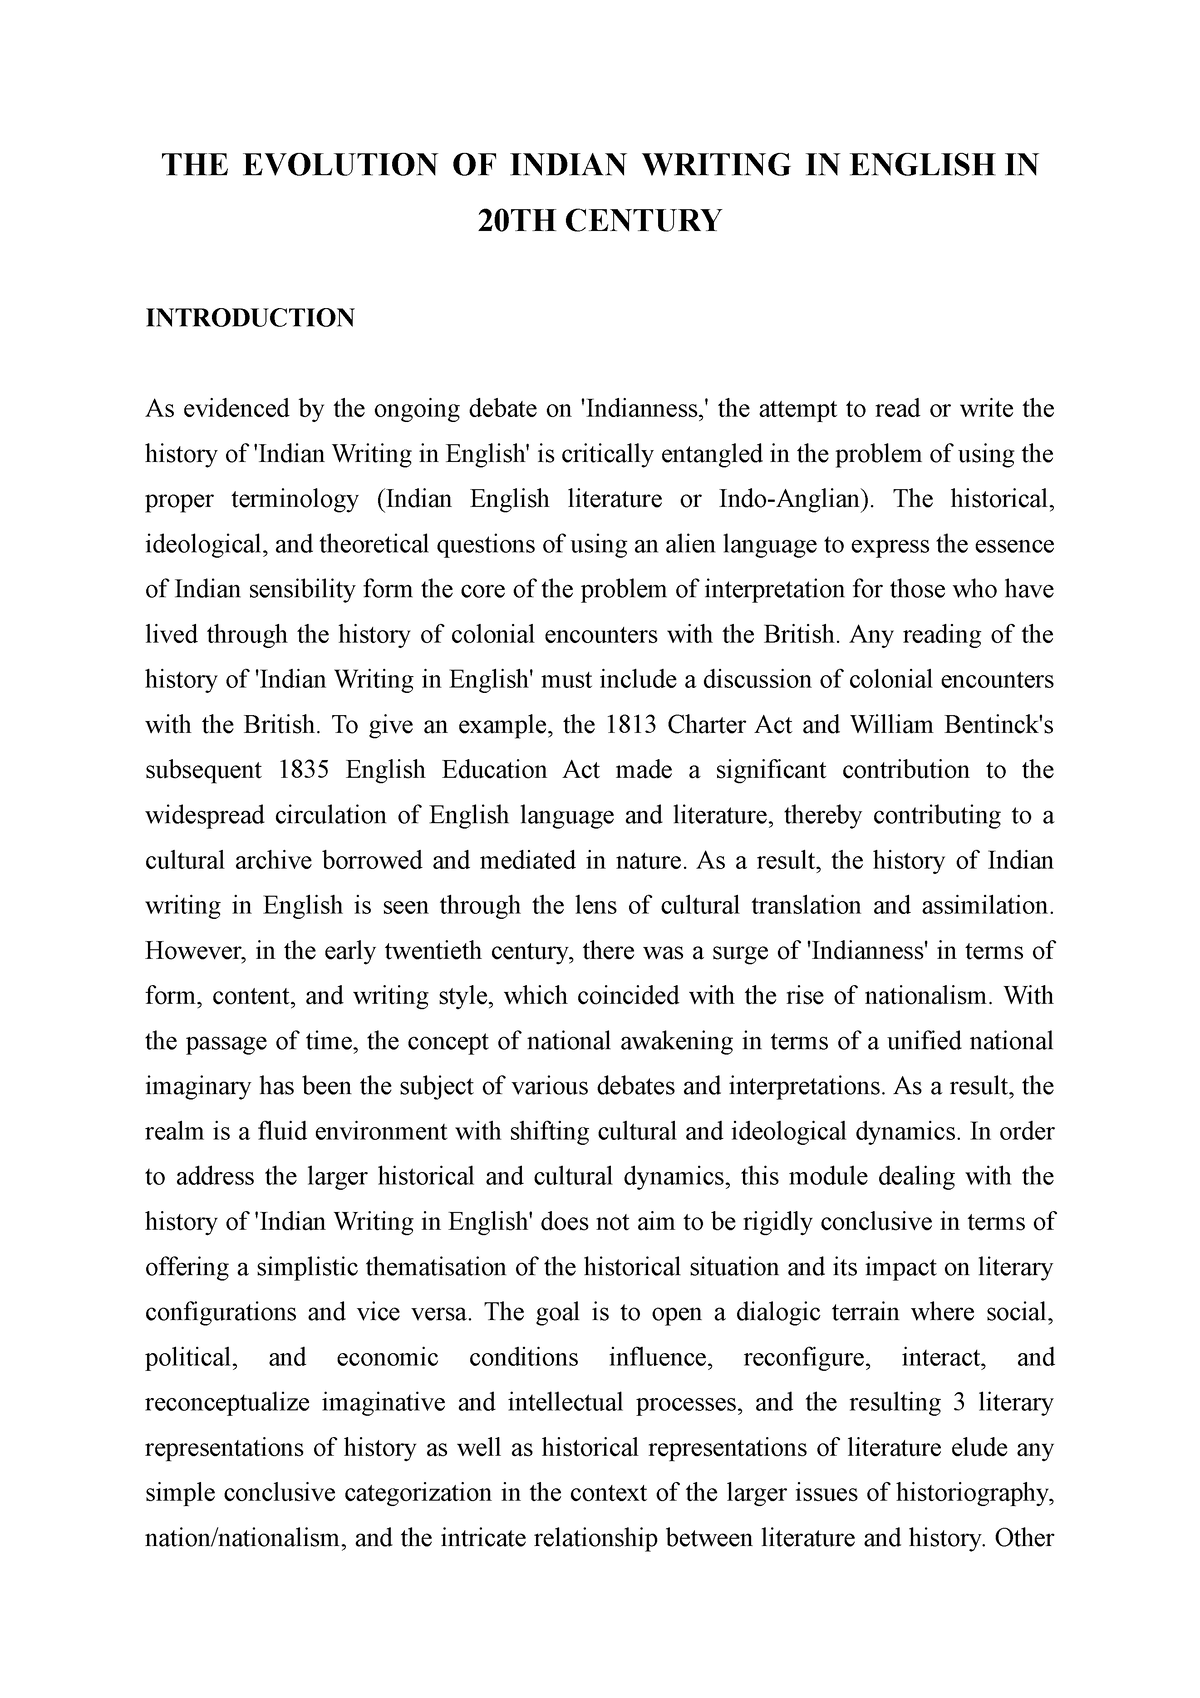 thesis on indian writing in english